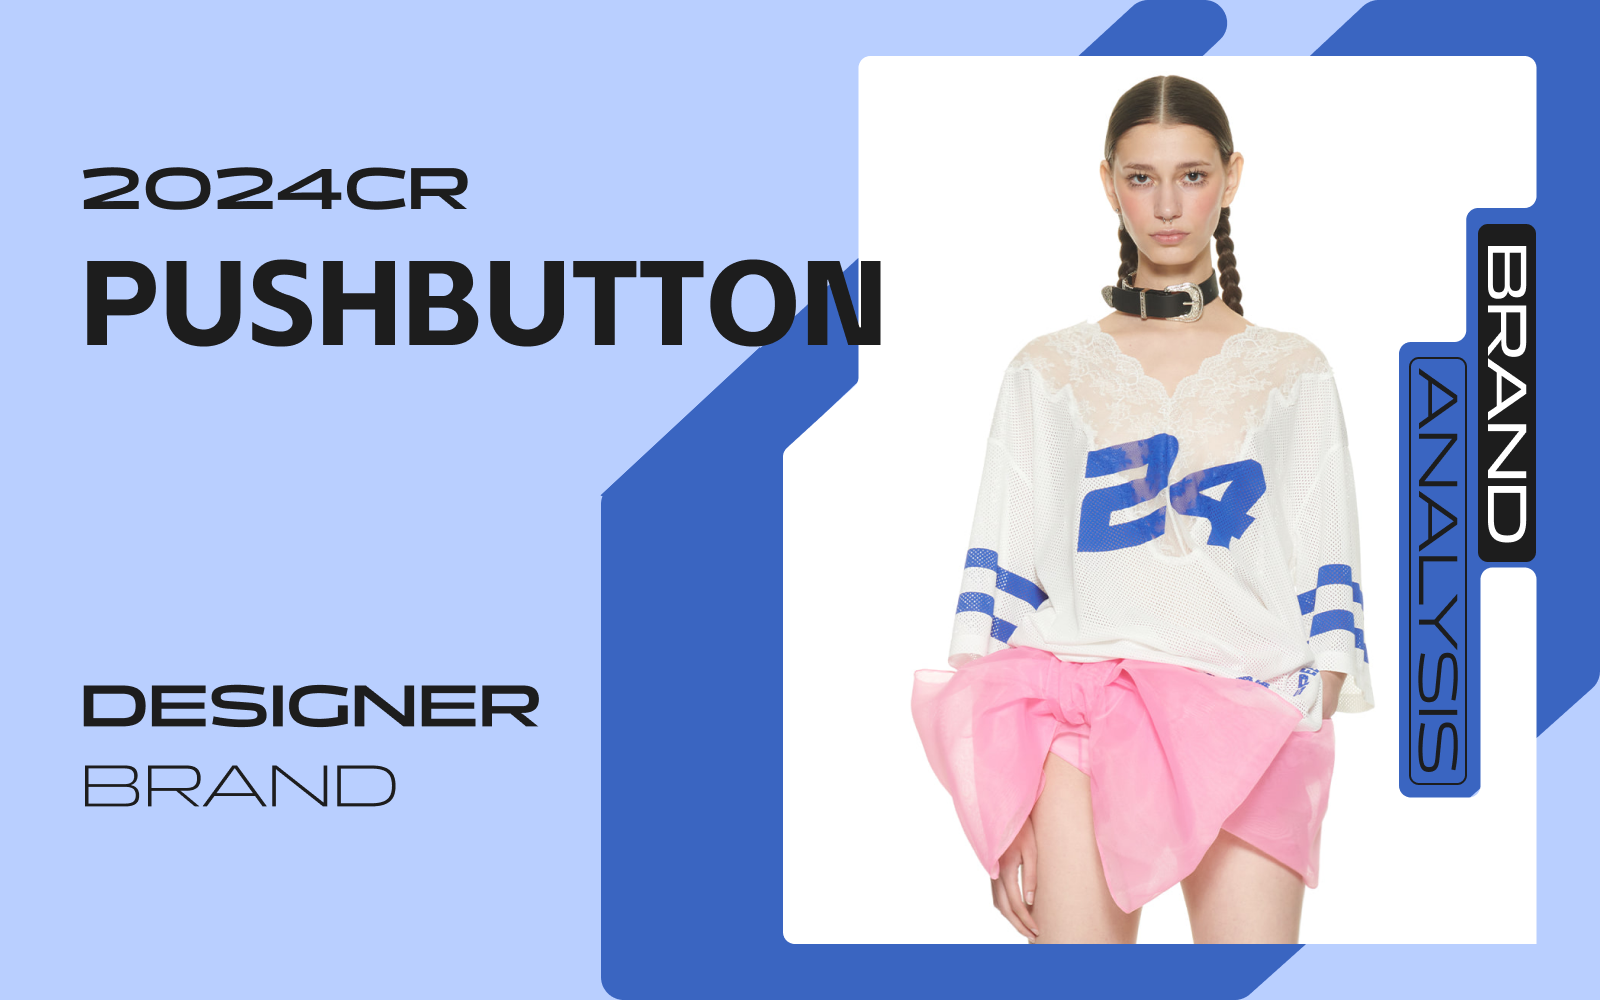 Sports Girl -- The Analysis of Pushbutton The Womenswear Designer Brand